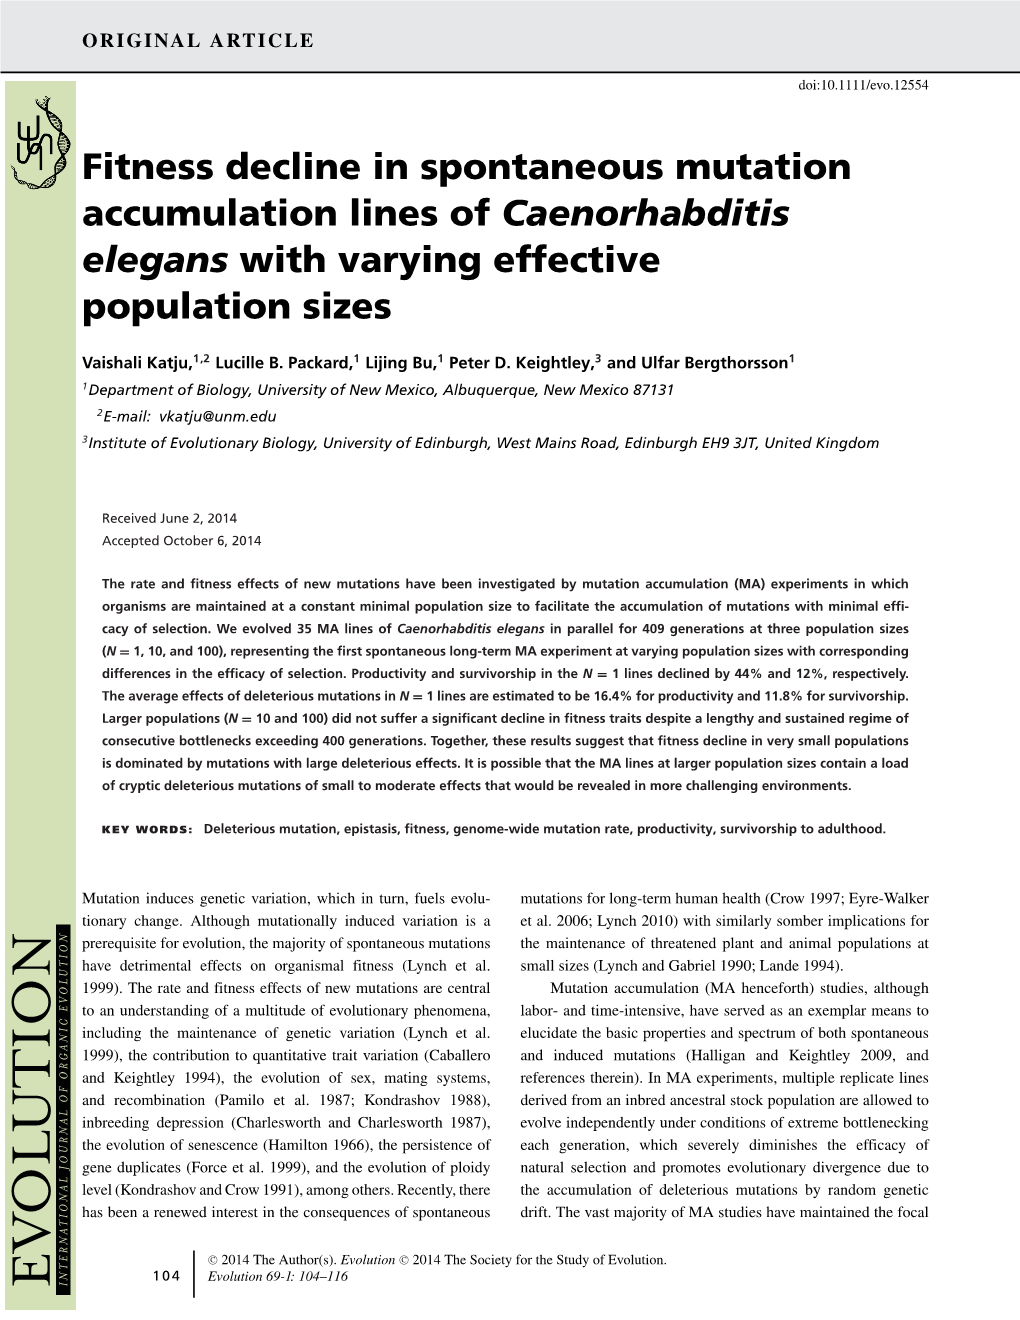 Fitness Decline in Spontaneous Mutation Accumulation Lines of Caenorhabditis Elegans with Varying Effective Population Sizes